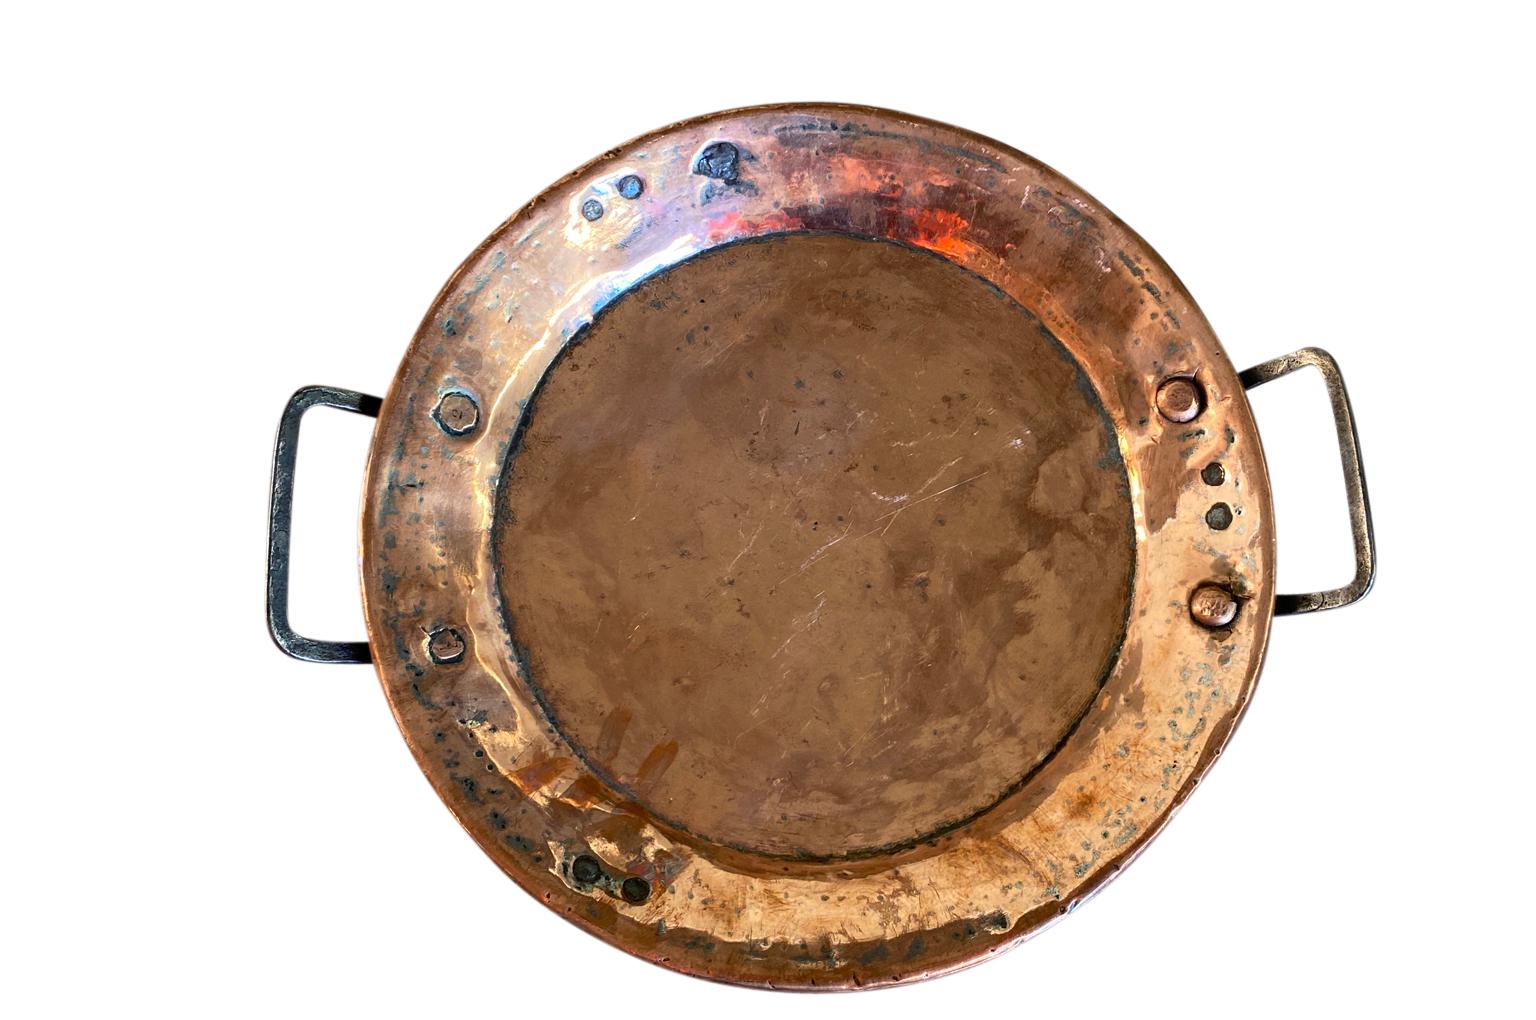 A delightful mid-19th century copper plate with handles from the South of France. A wonderful addition to any copperware collection.